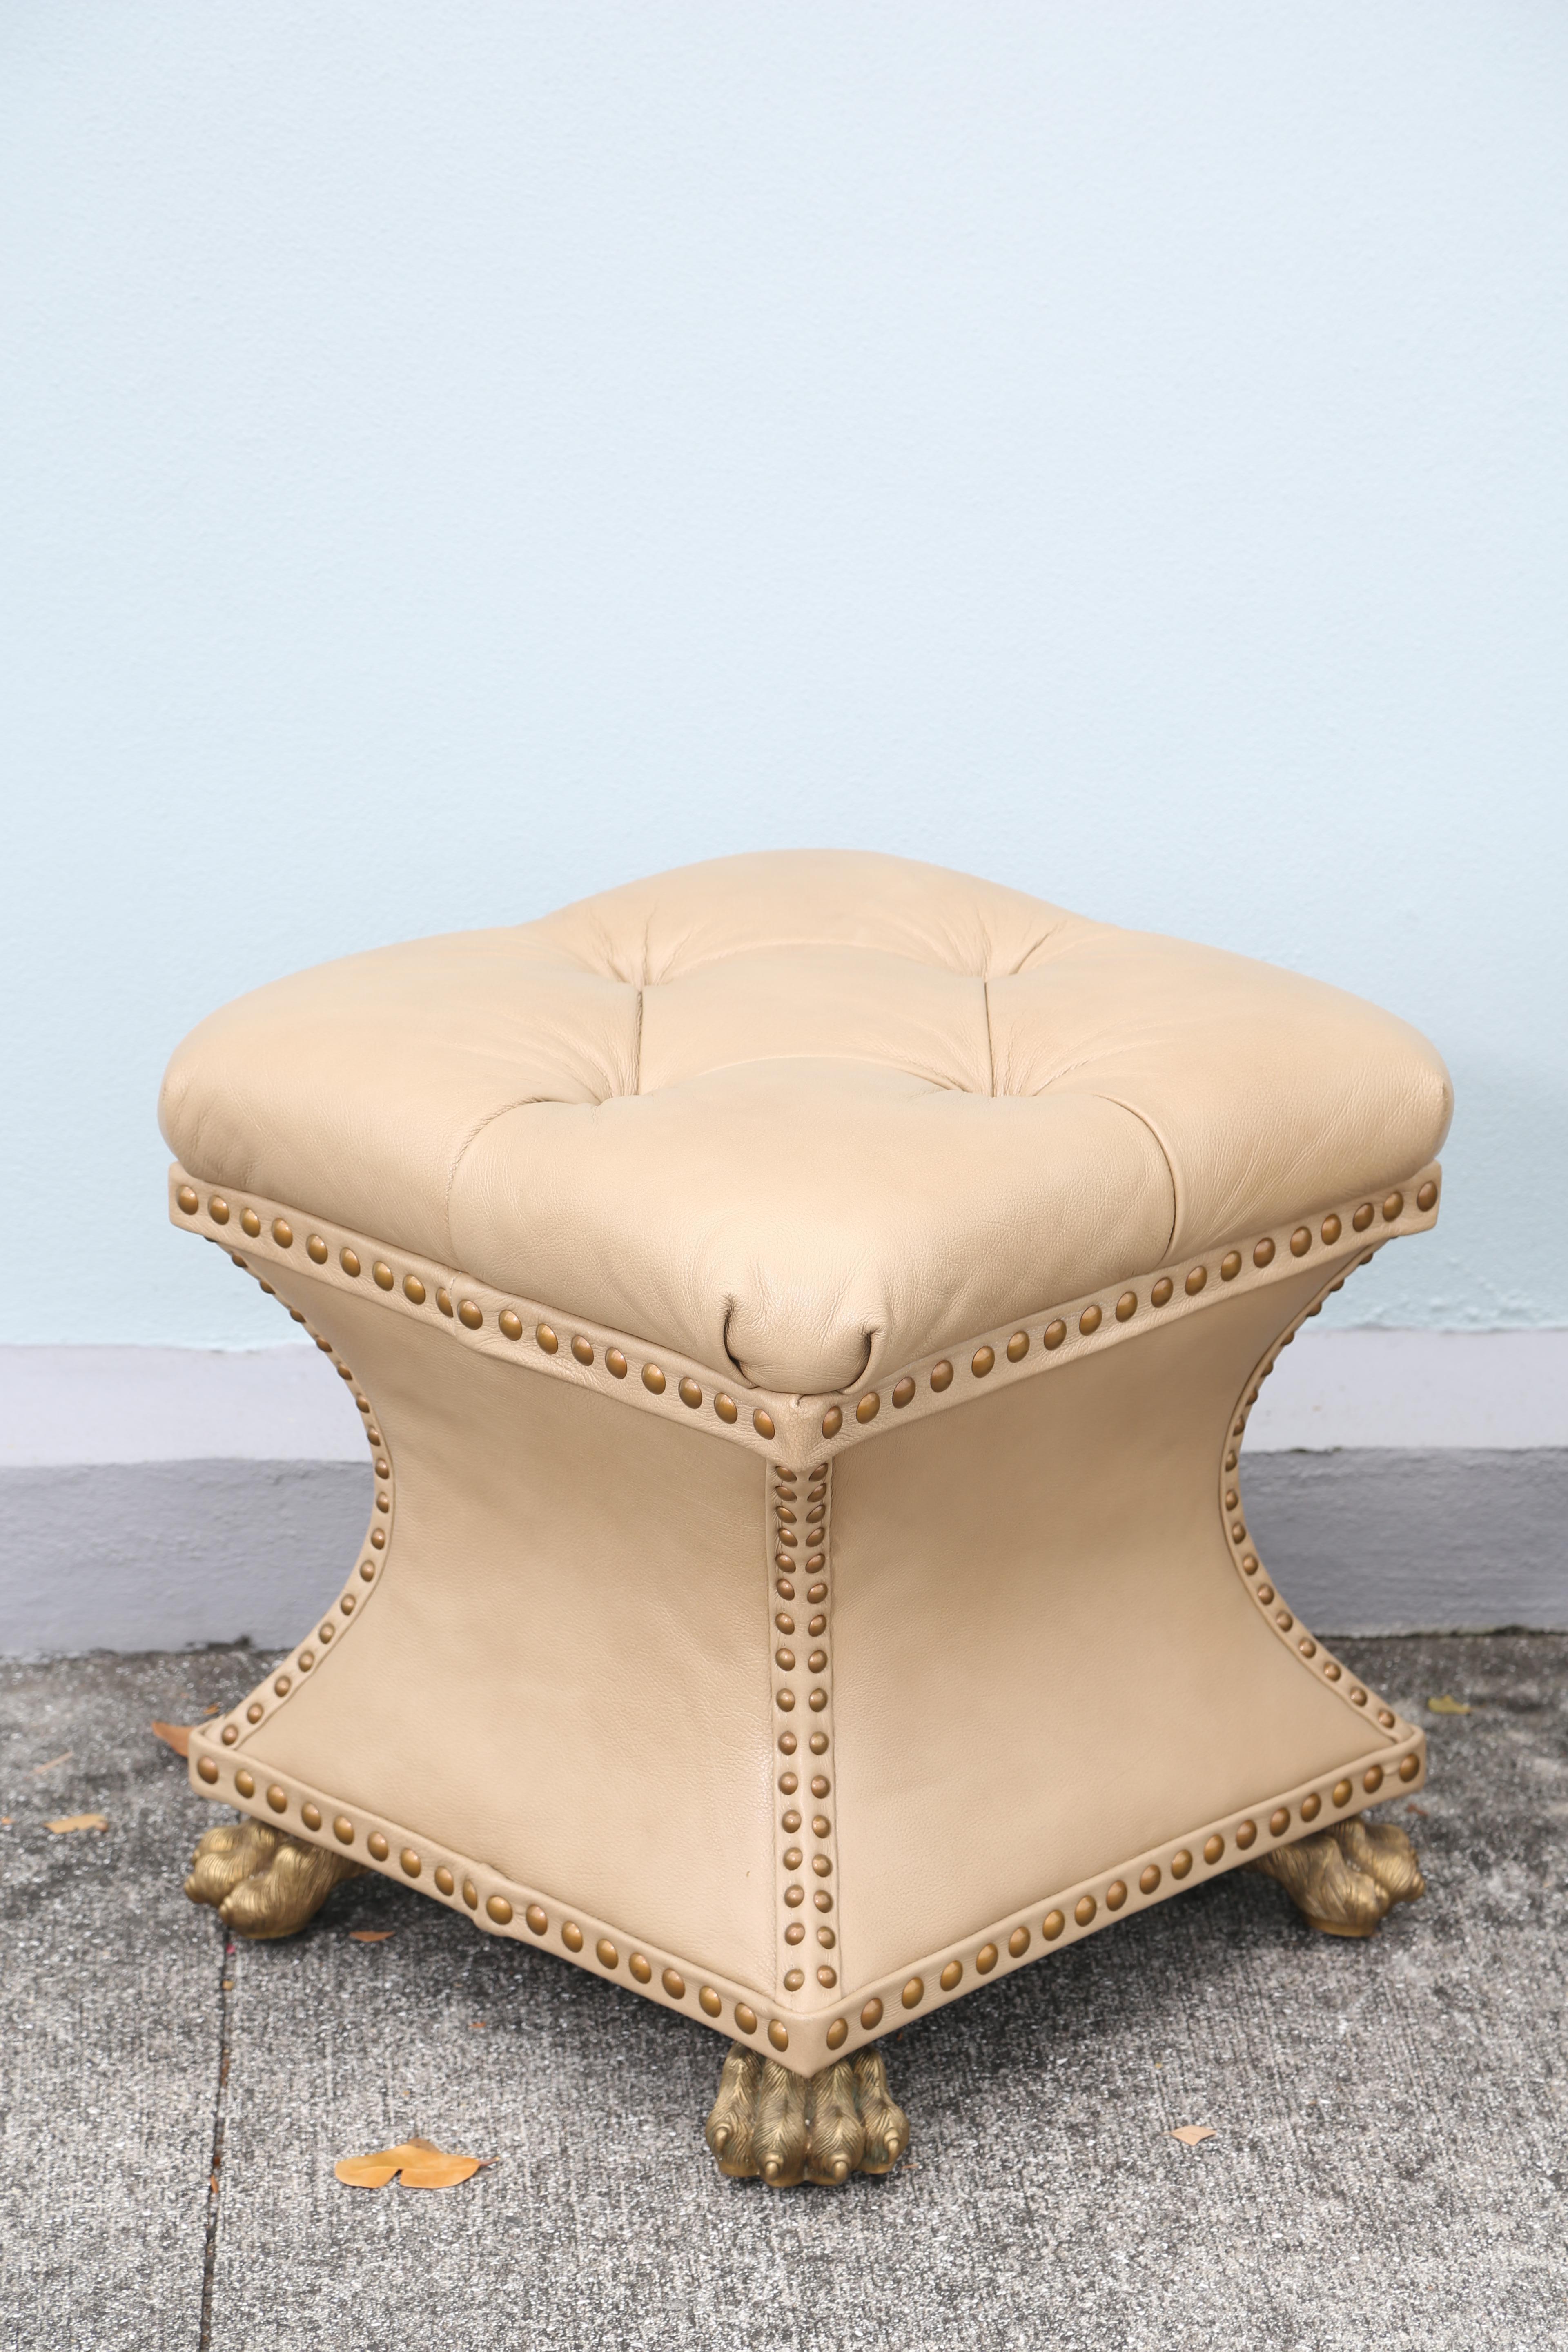 Pair of Tufted Leather Ottomans 1